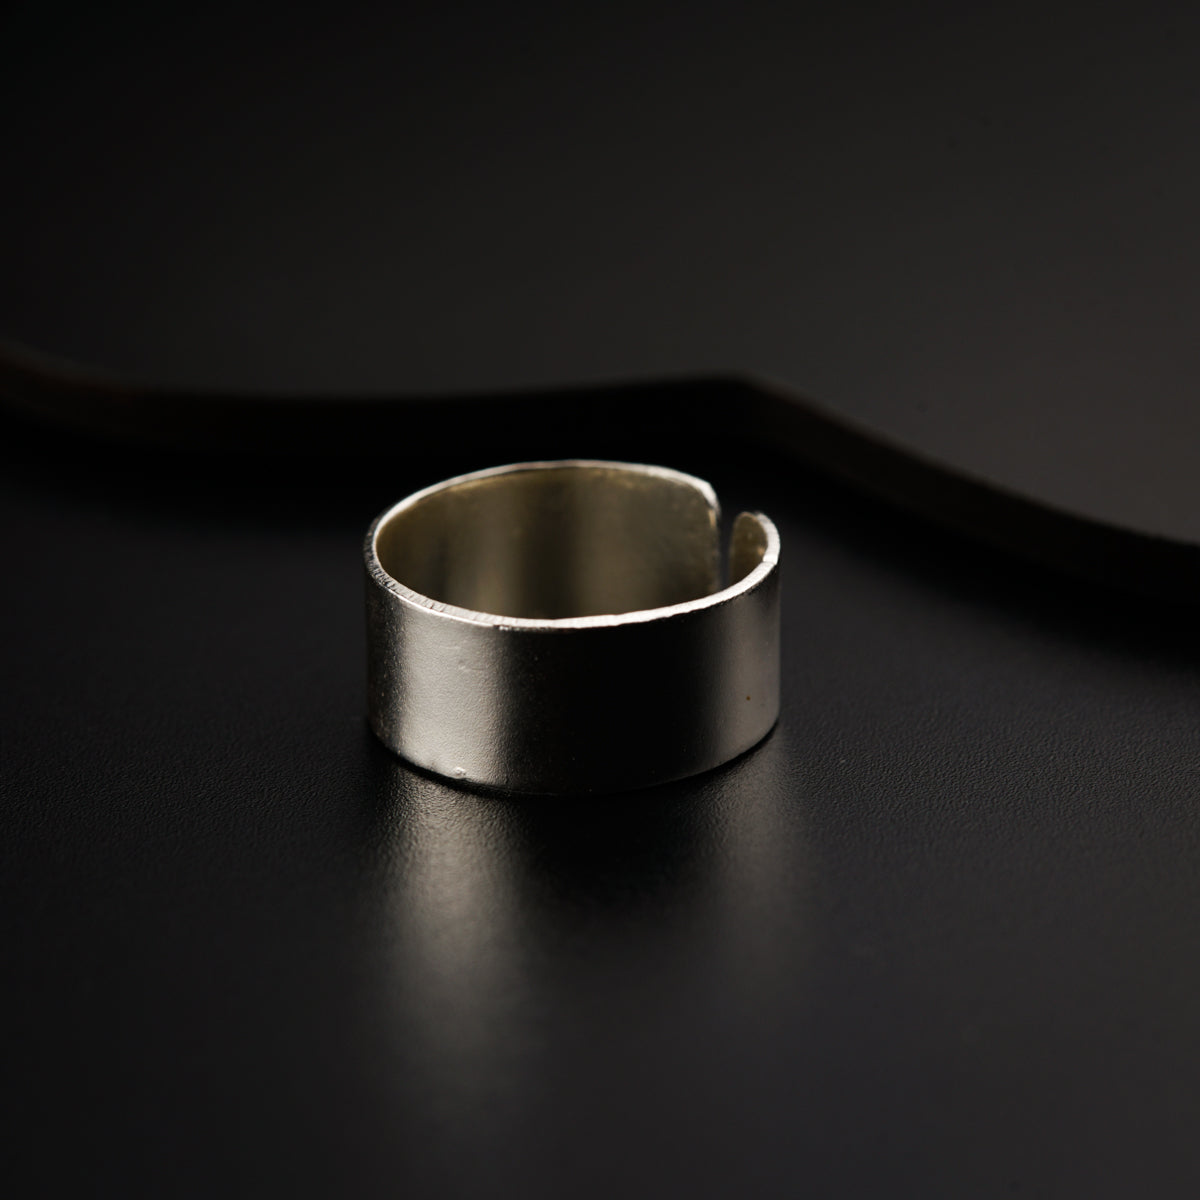 a silver ring sitting on top of a black table